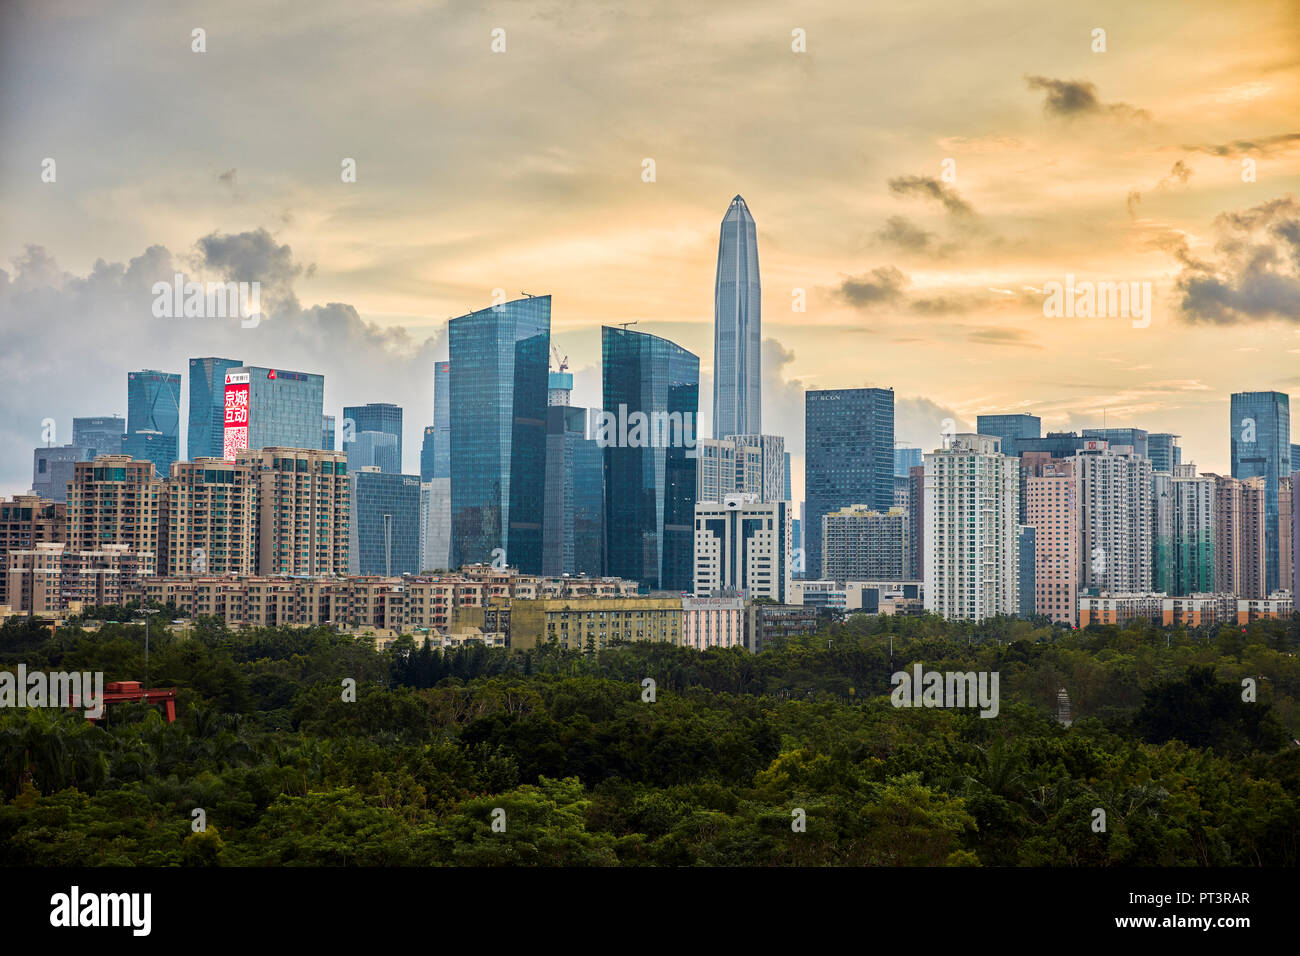 High-rise buildings in Futian District. Shenzhen, Guangdong Province, China. Stock Photo